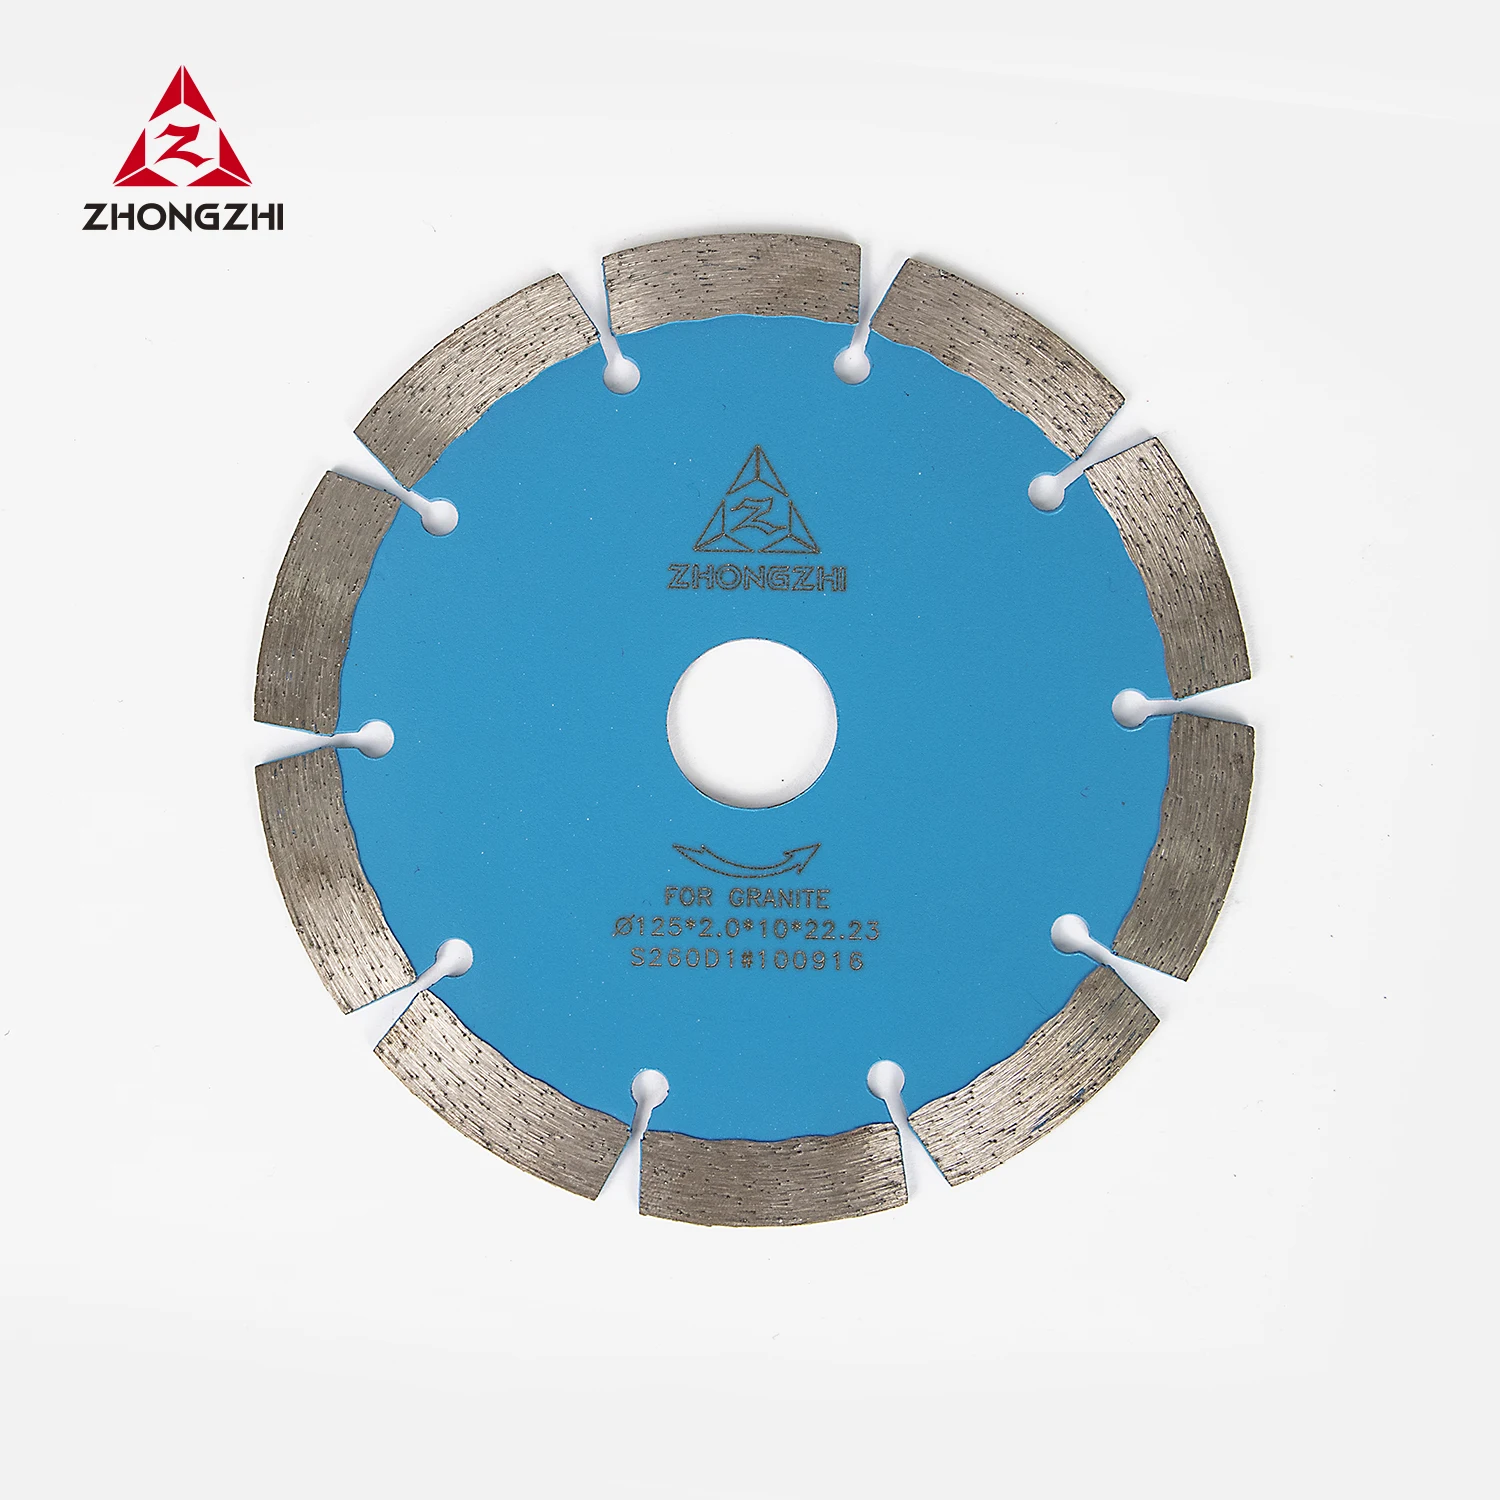 

Painted 125mm Hot Pressed Sintered Thin Turbo Rim Diamond Dry Cutters for Granite Natural Stones for Good Edge Cut, Upon request